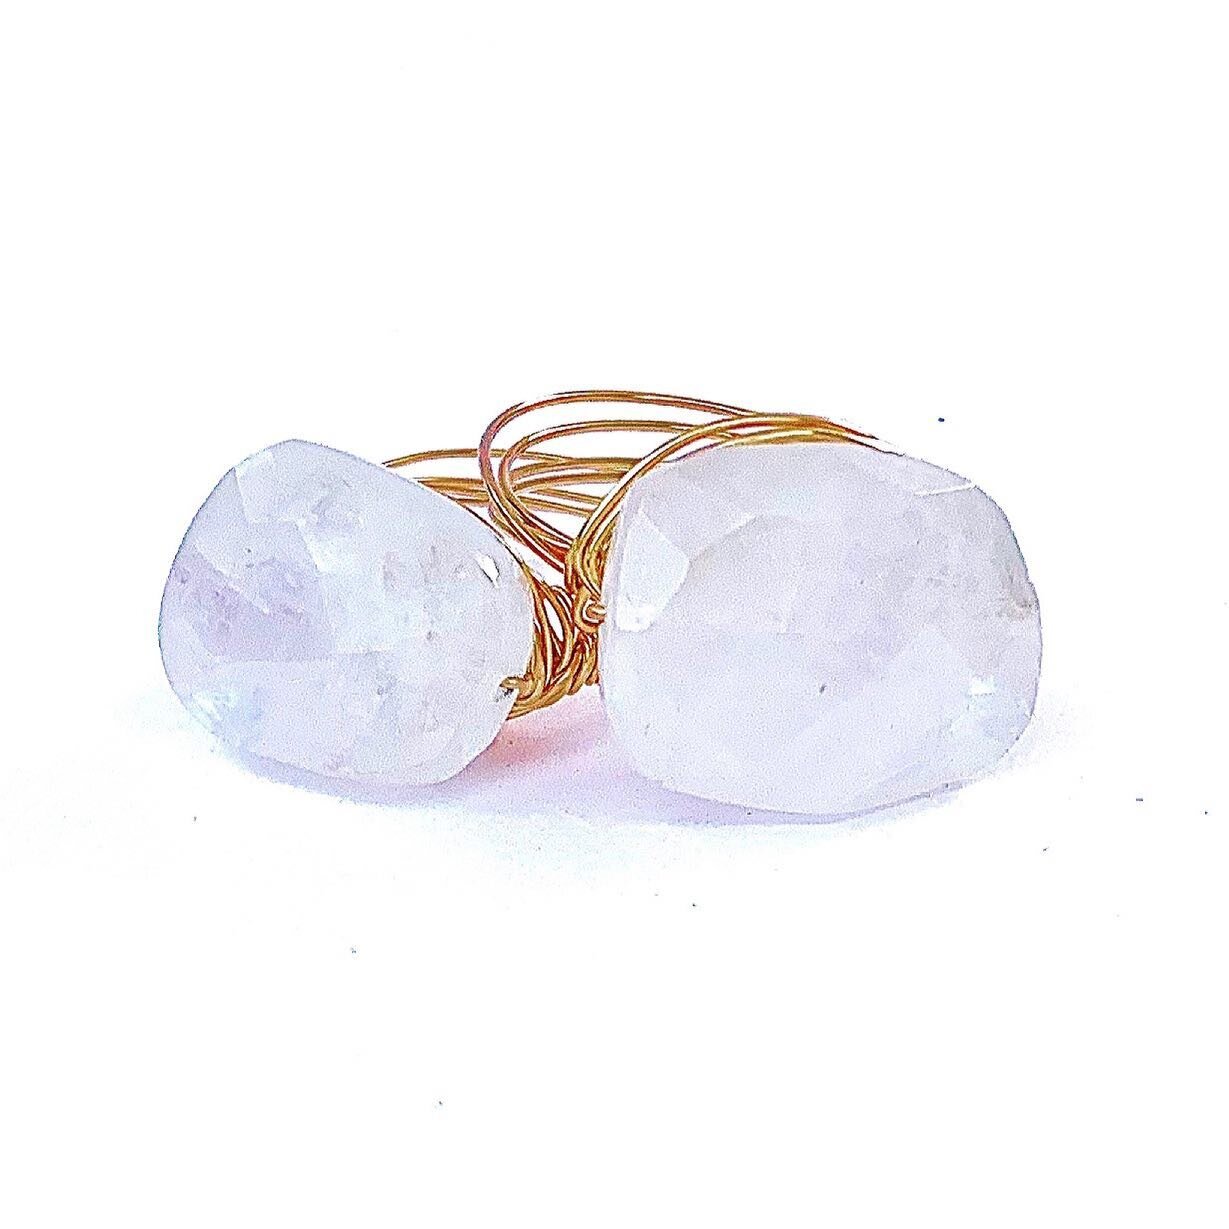 Moonstone Magic 🤍 We have just a few more of these luminescent beauties left ... DM to make one yours! #moonstonejewelry #goddessenergy #purebeauty